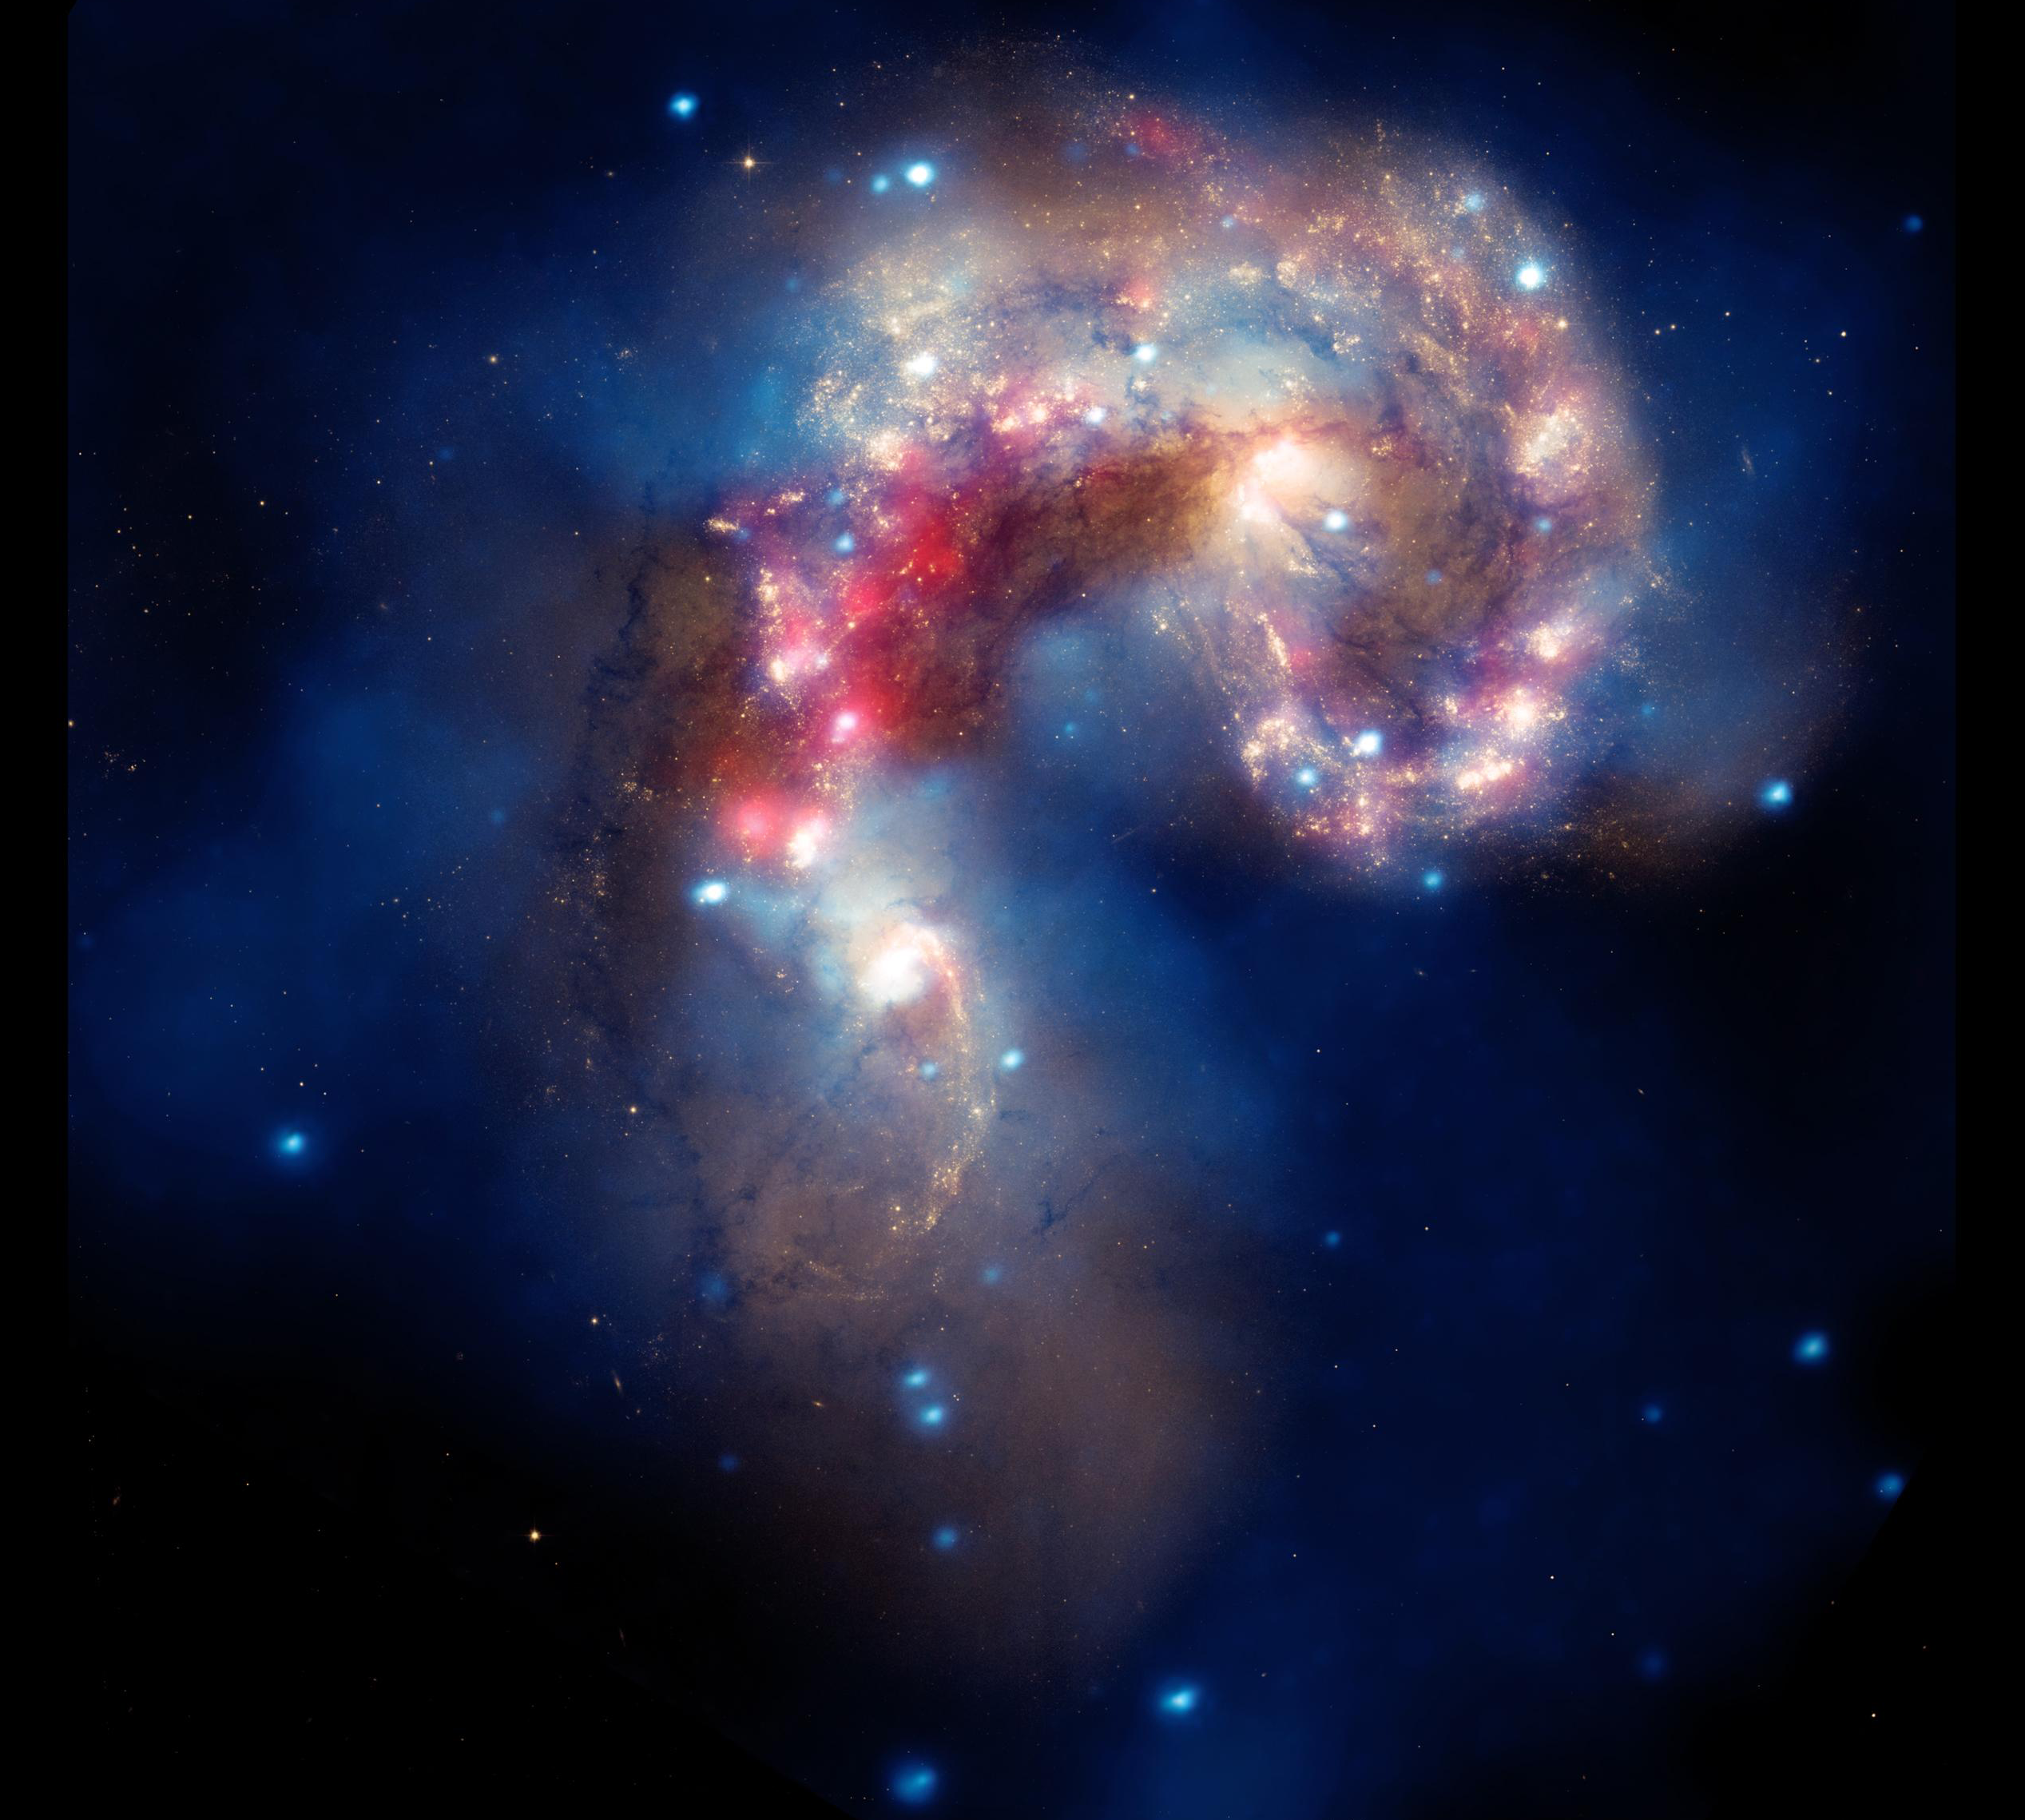 The Antennae galaxies, located about 62 million light years from Earth, are shown in this composite image from the Chandra X-ray Observatory (blue), the Hubble Space Telescope (gold and brown), and the Spitzer Space Telescope (red)